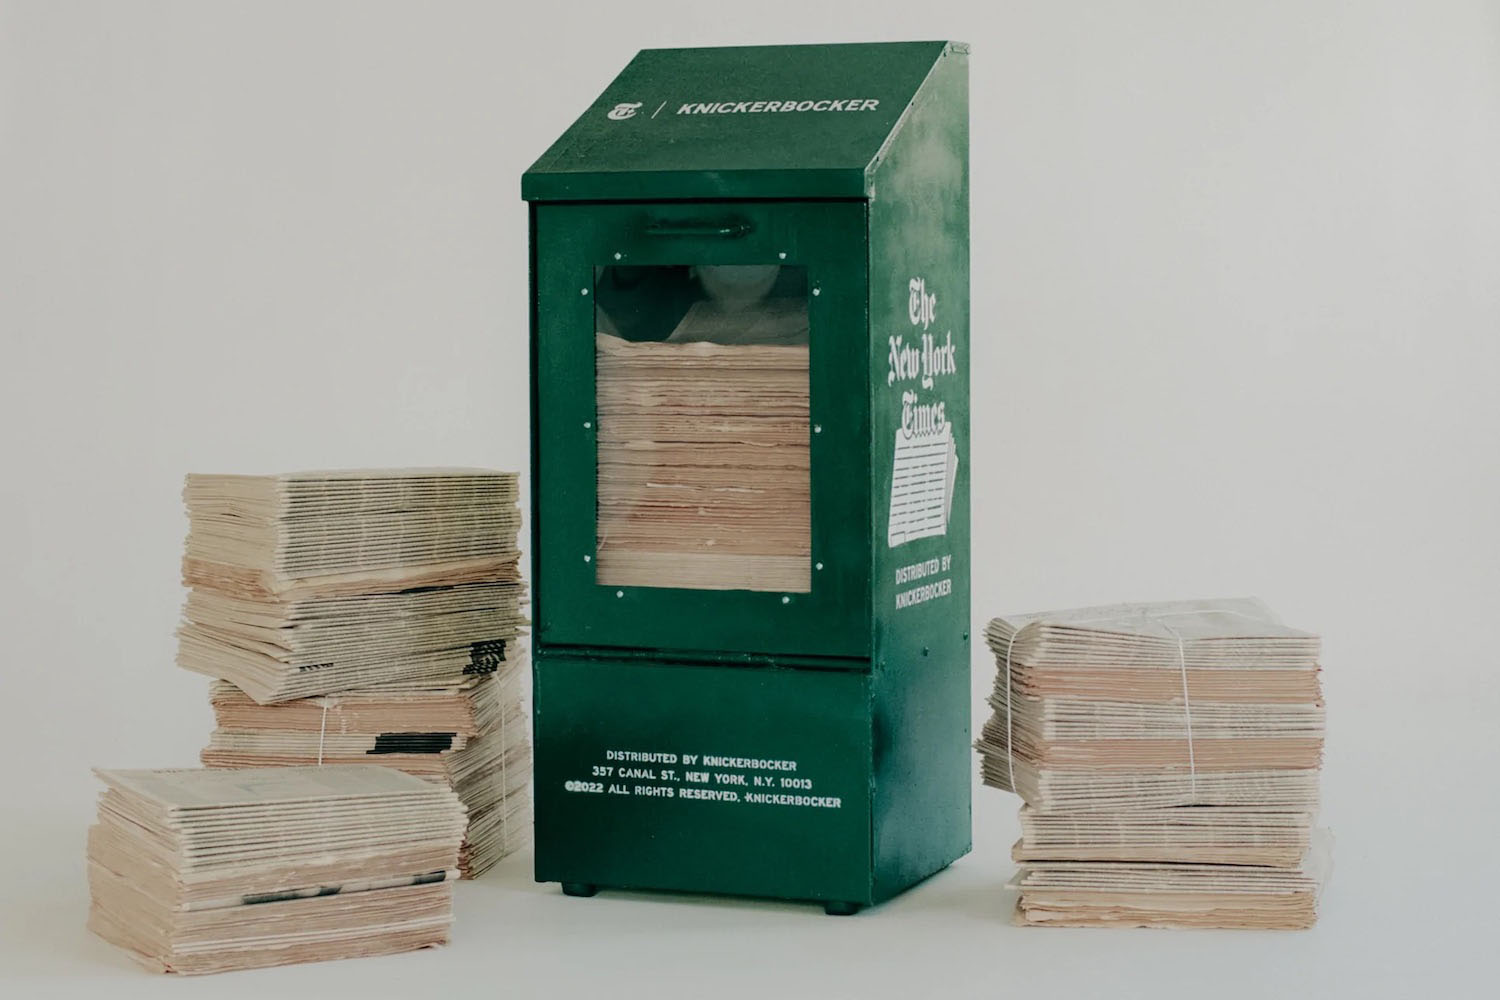 a news box and stacks of news papers on a grey background